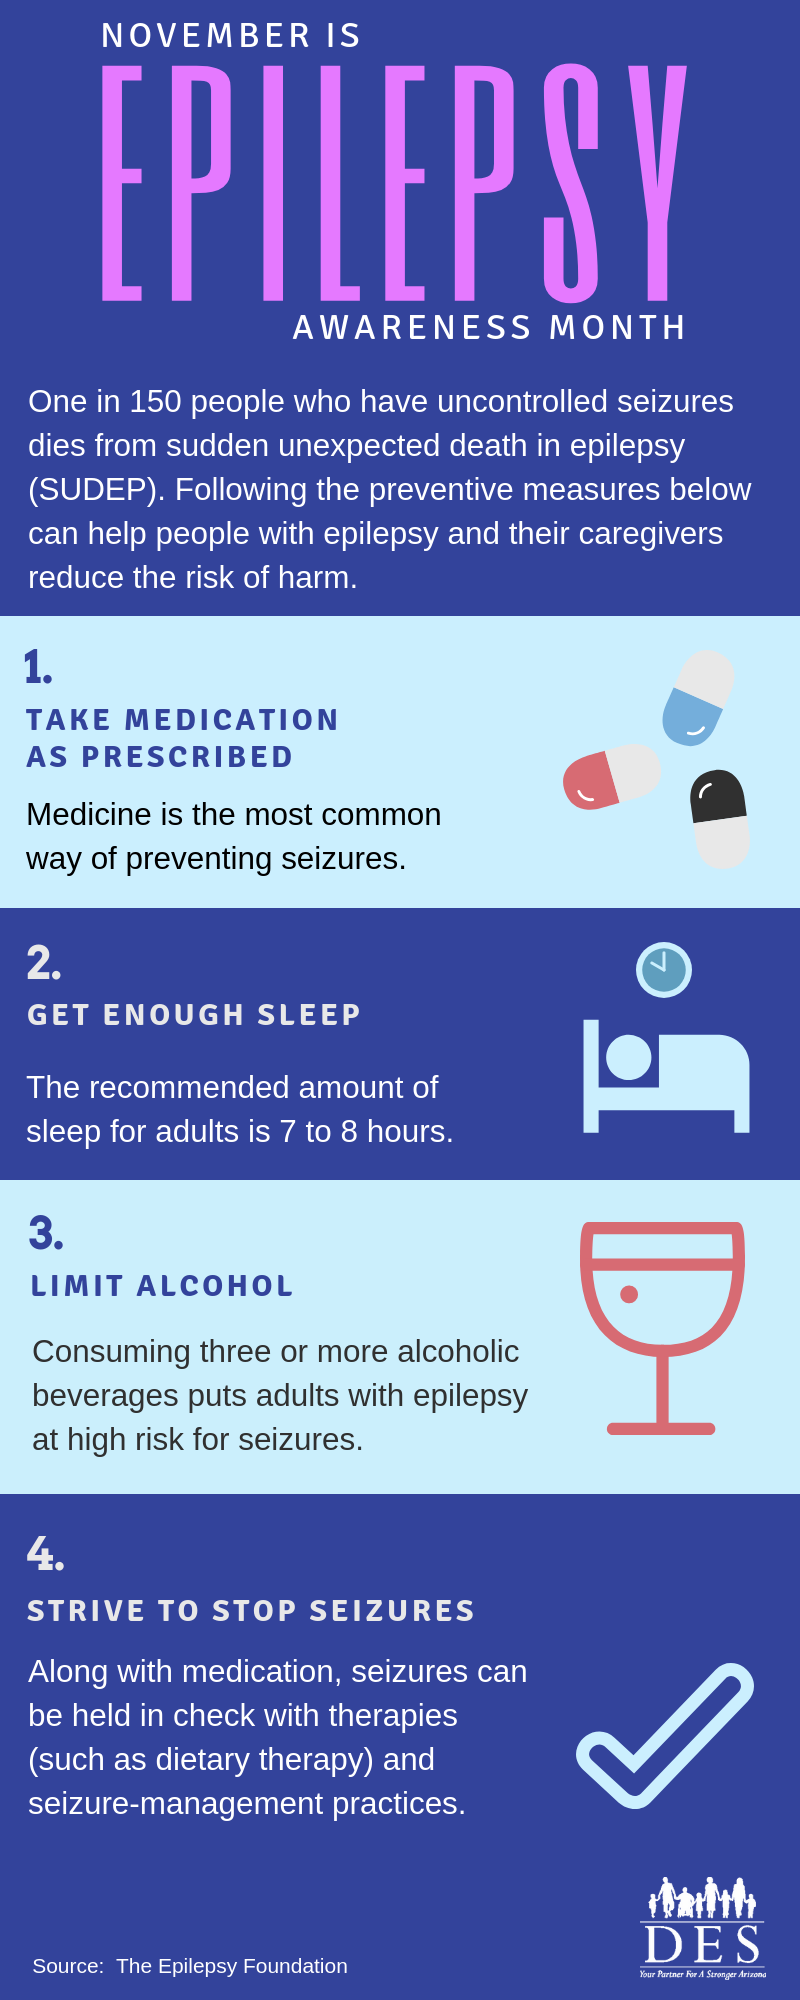 A list of tips for preventing epileptic seizures